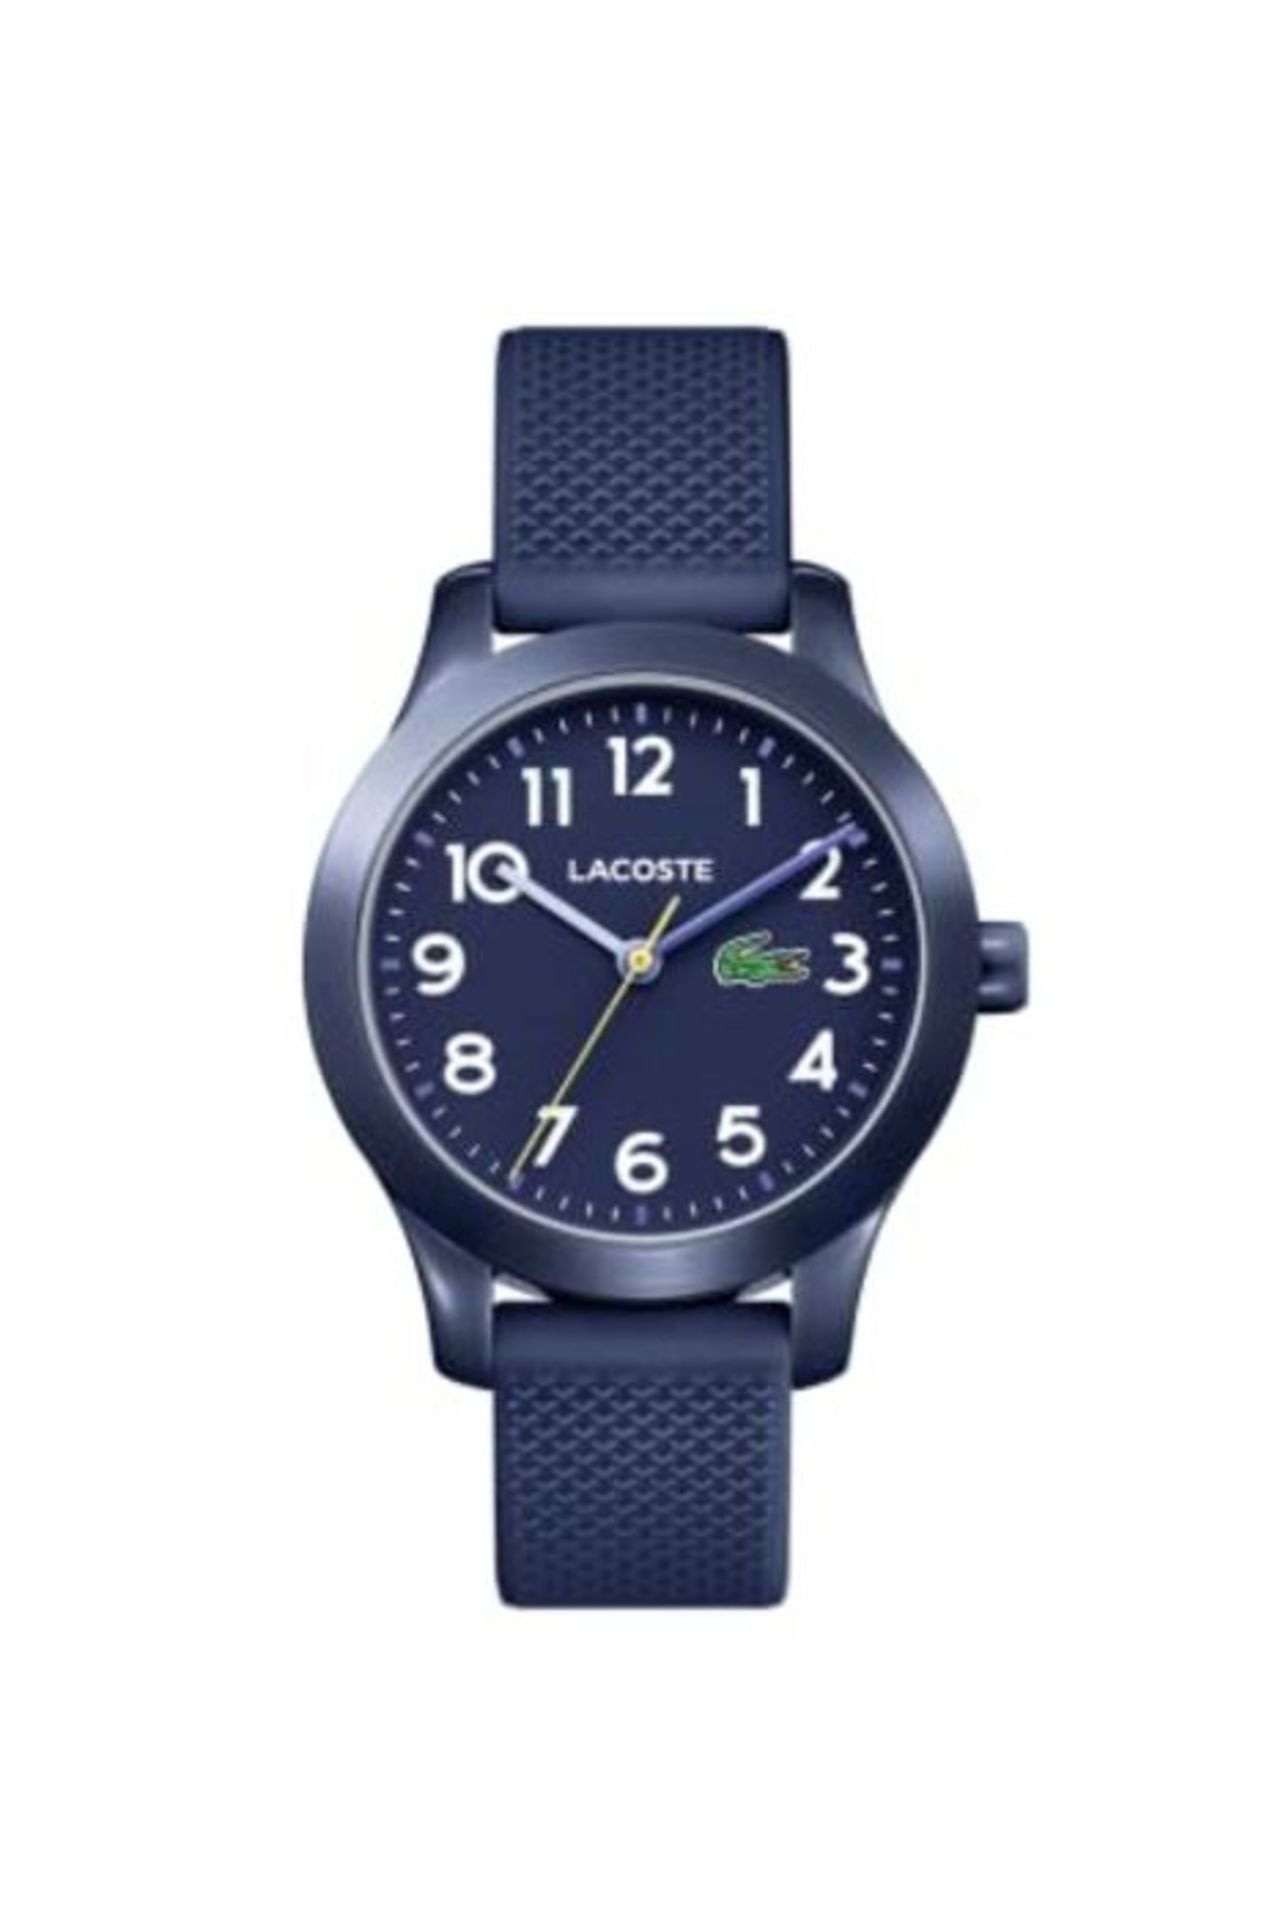 [INCOMPLETE] Lacoste Unisex-Kids Analogue Quartz Watch with Rubber Strap 2030002